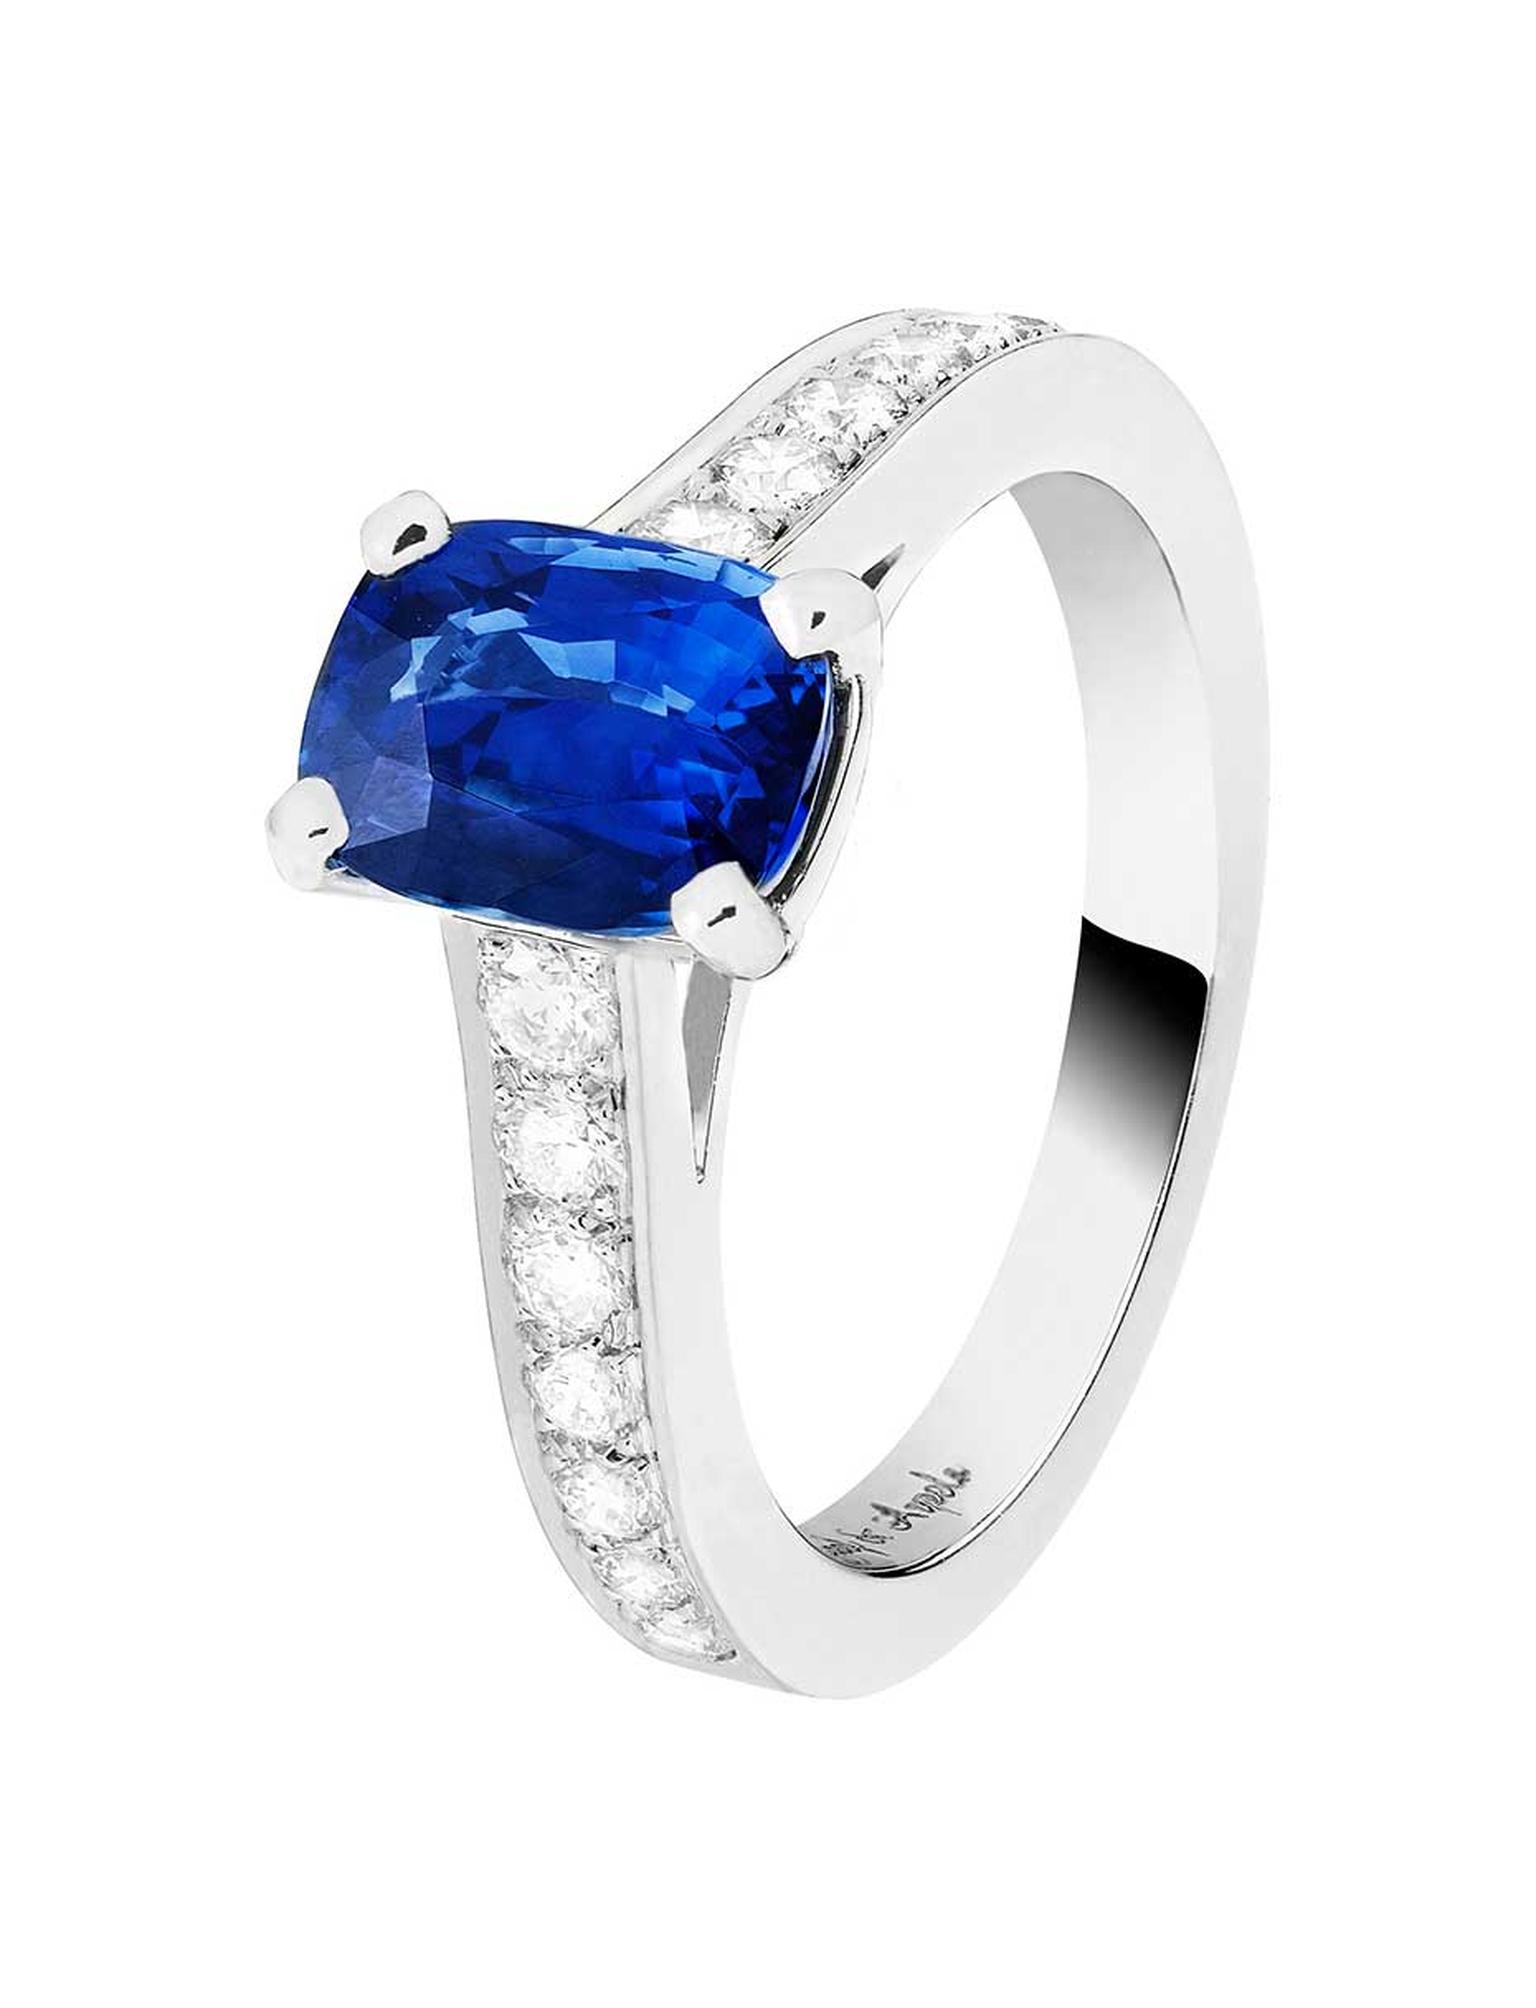 Worn by Kirsten Dunst to the 2014 Met Ball, the Van Cleef & Arpels Pushkar platinum ring featuring a 2.60ct sapphire and diamonds